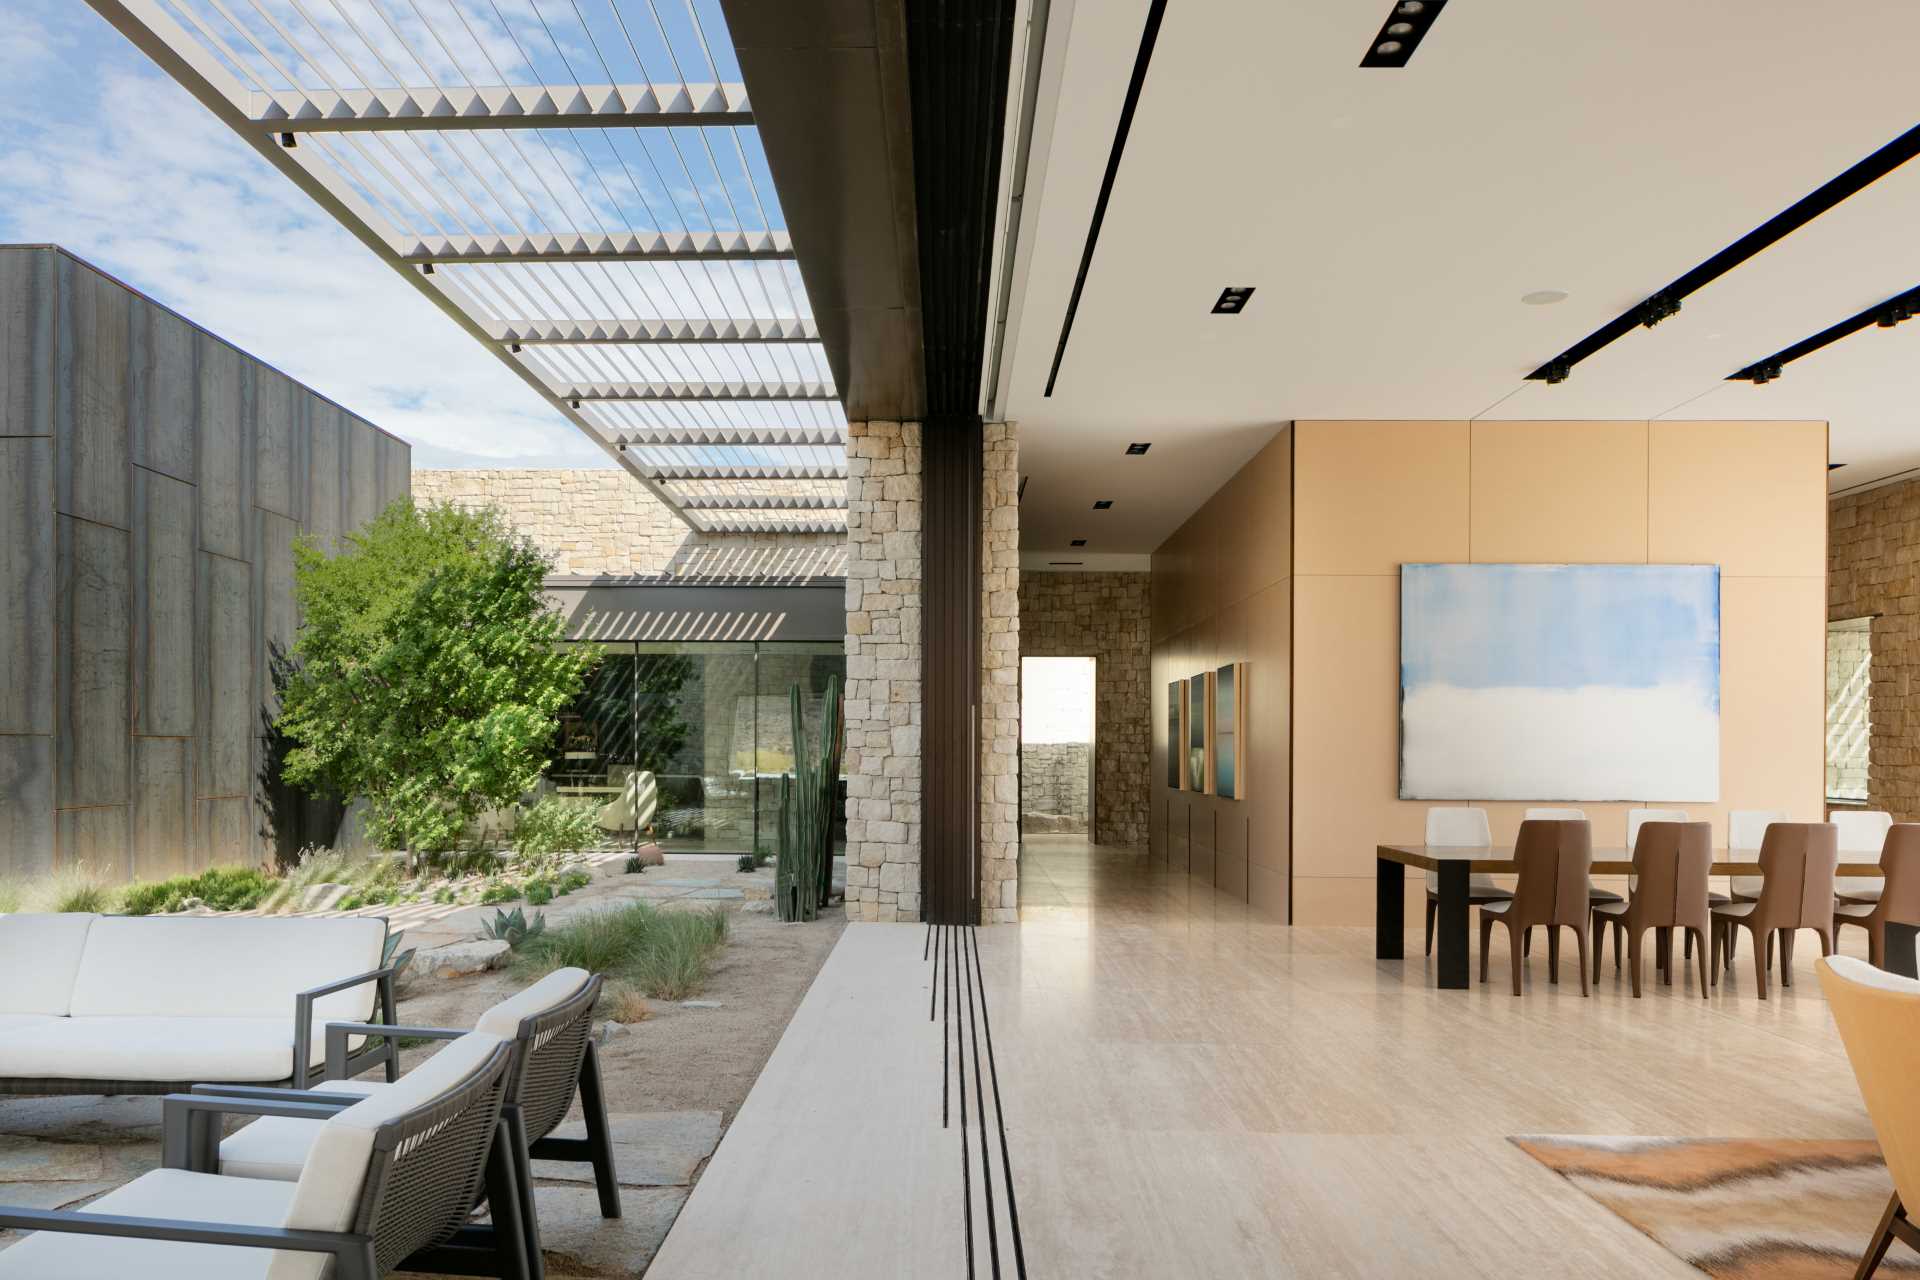 A modern living room and dining area that opens up to a private courtyard.